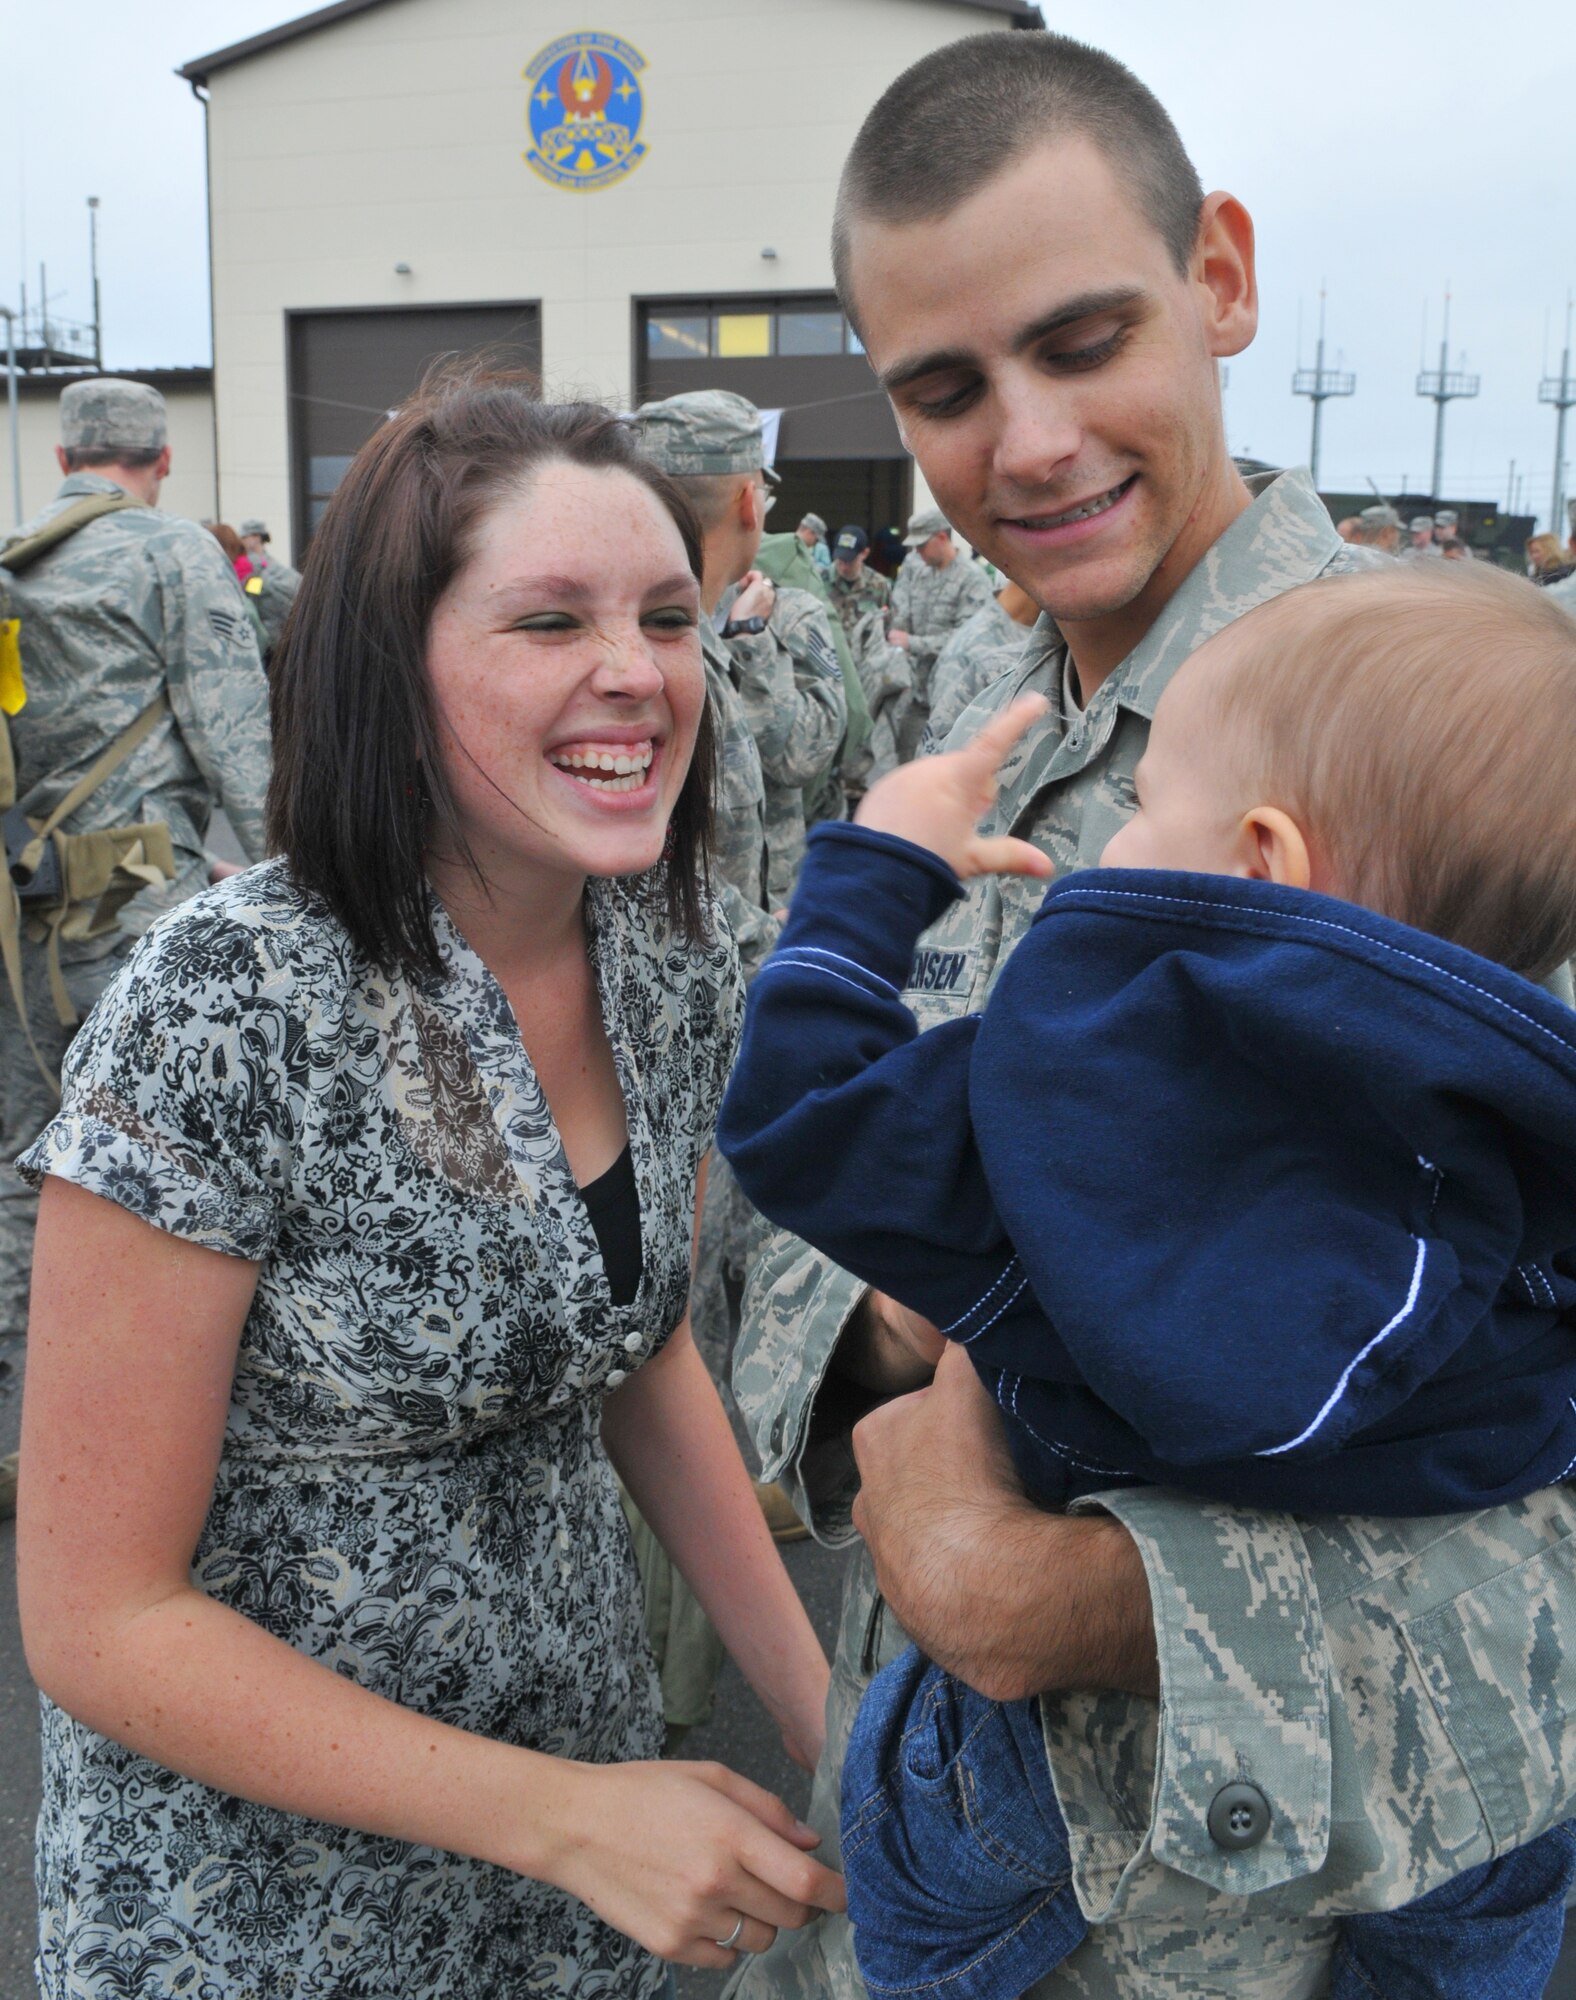 SPANGDAHLEM AIR BASE, Germany – Airman 1st Class Devin Christensen, 606th Air Control Squadron hugs his son Maxten while his wife Robyn looks on after returning from a four-month deployment to Kandahar, Afghanistan, Sept. 16.  About 60 members of the 606th ACS operated radar and communication for command and control for the 71st Expeditionary Air Control Squadron as well as to support air battle management. The unit also deployed 300 short tons of equipment to support air battle management operations and more than 13,000 sorties.  Approximately 30 other 606th ACS members also returned from a four-month deployment to southwest Asia in support of the 73rd EACS.  (U.S. Air Force photo/Airman 1st Class Nick Wilson)